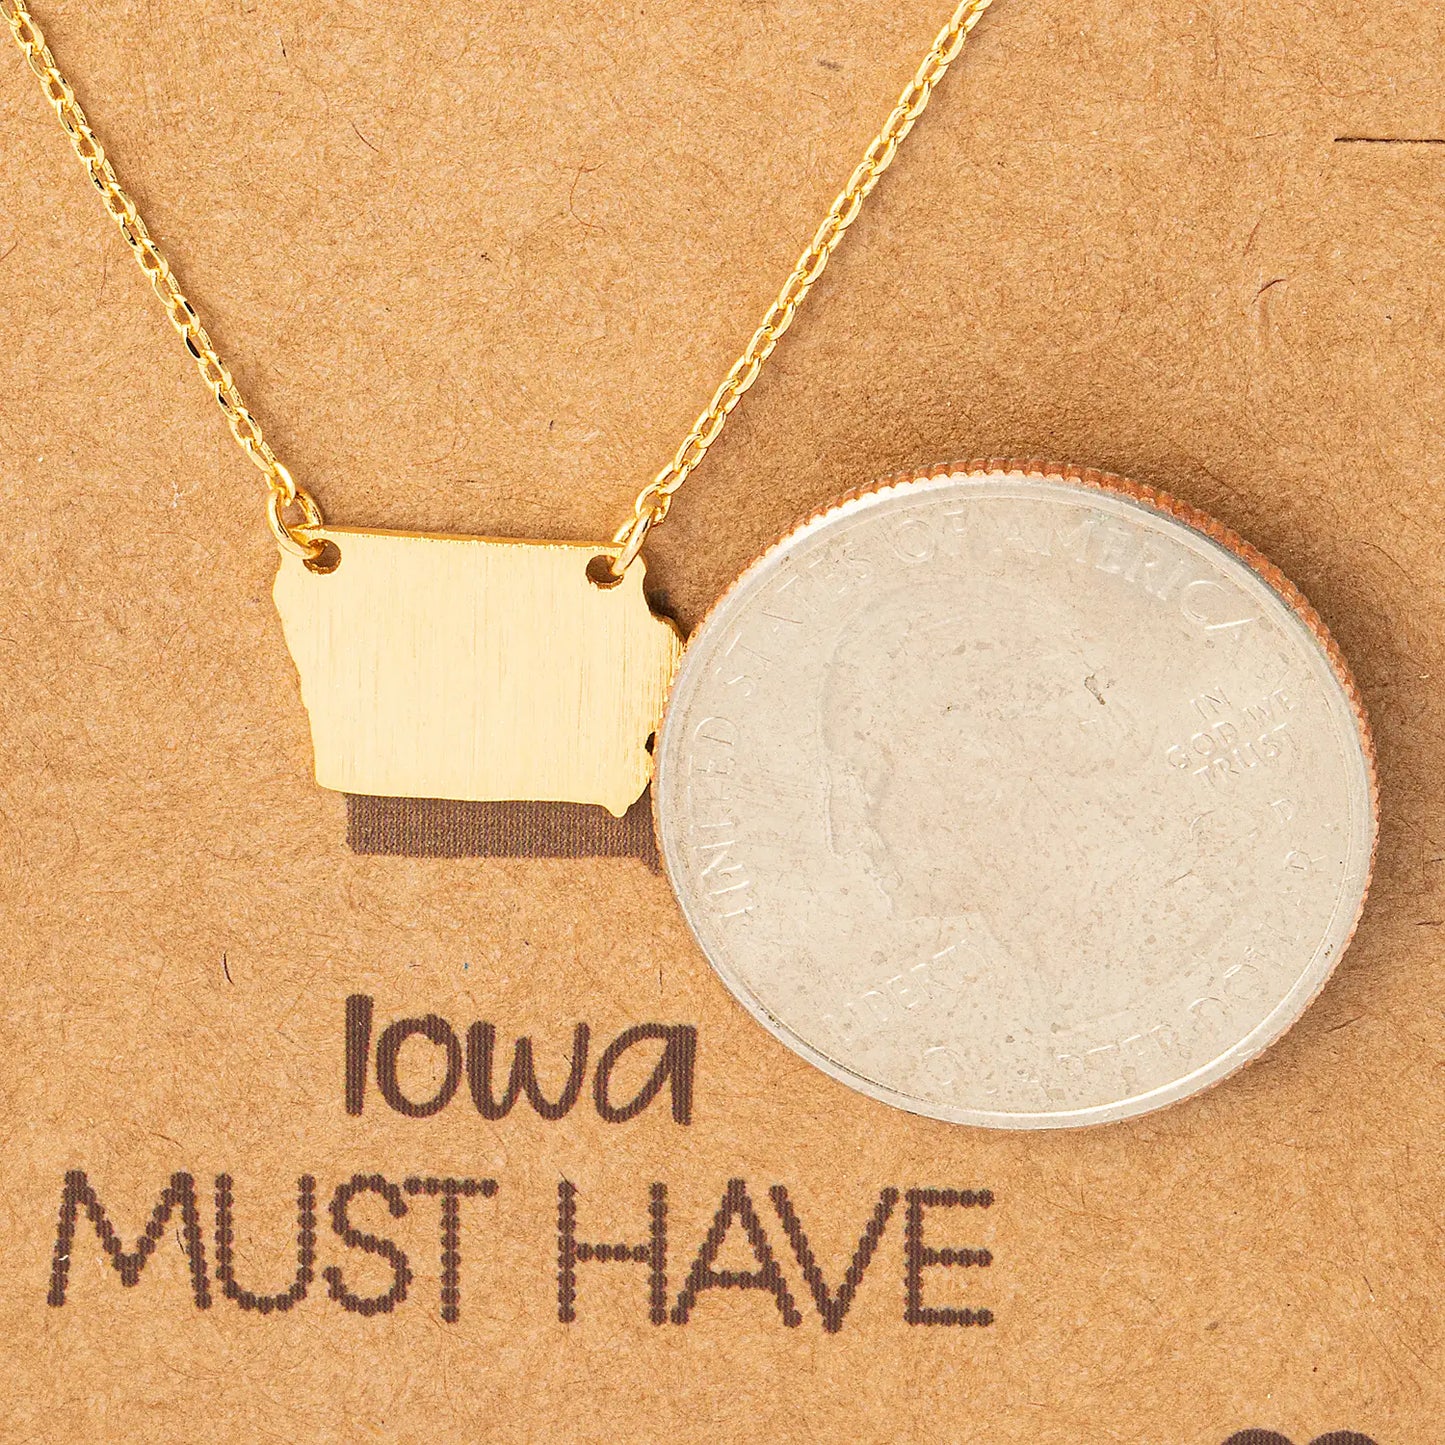 Iowa Must Have Necklace